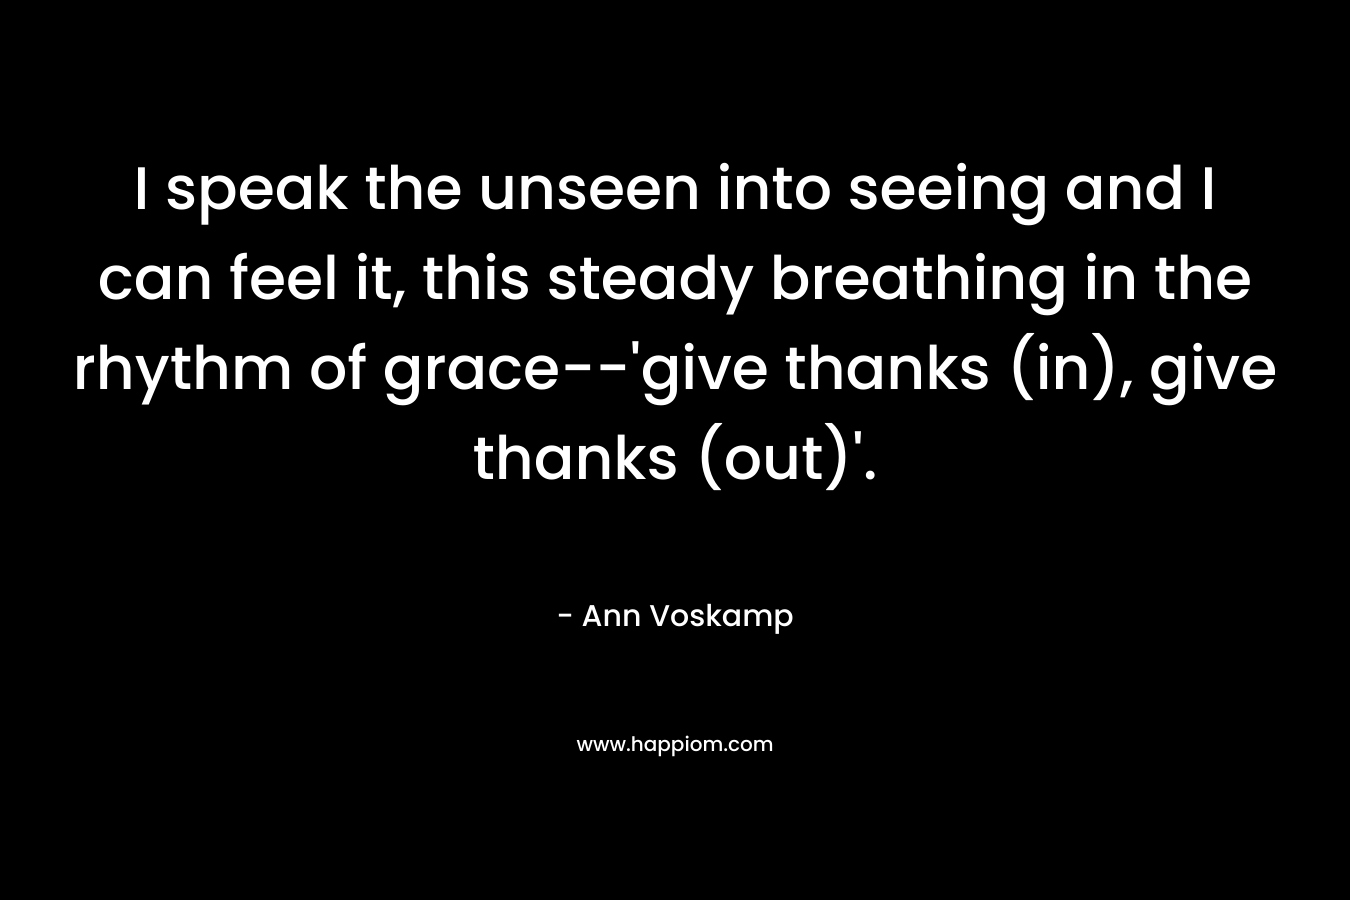 I speak the unseen into seeing and I can feel it, this steady breathing in the rhythm of grace–‘give thanks (in), give thanks (out)’. – Ann Voskamp